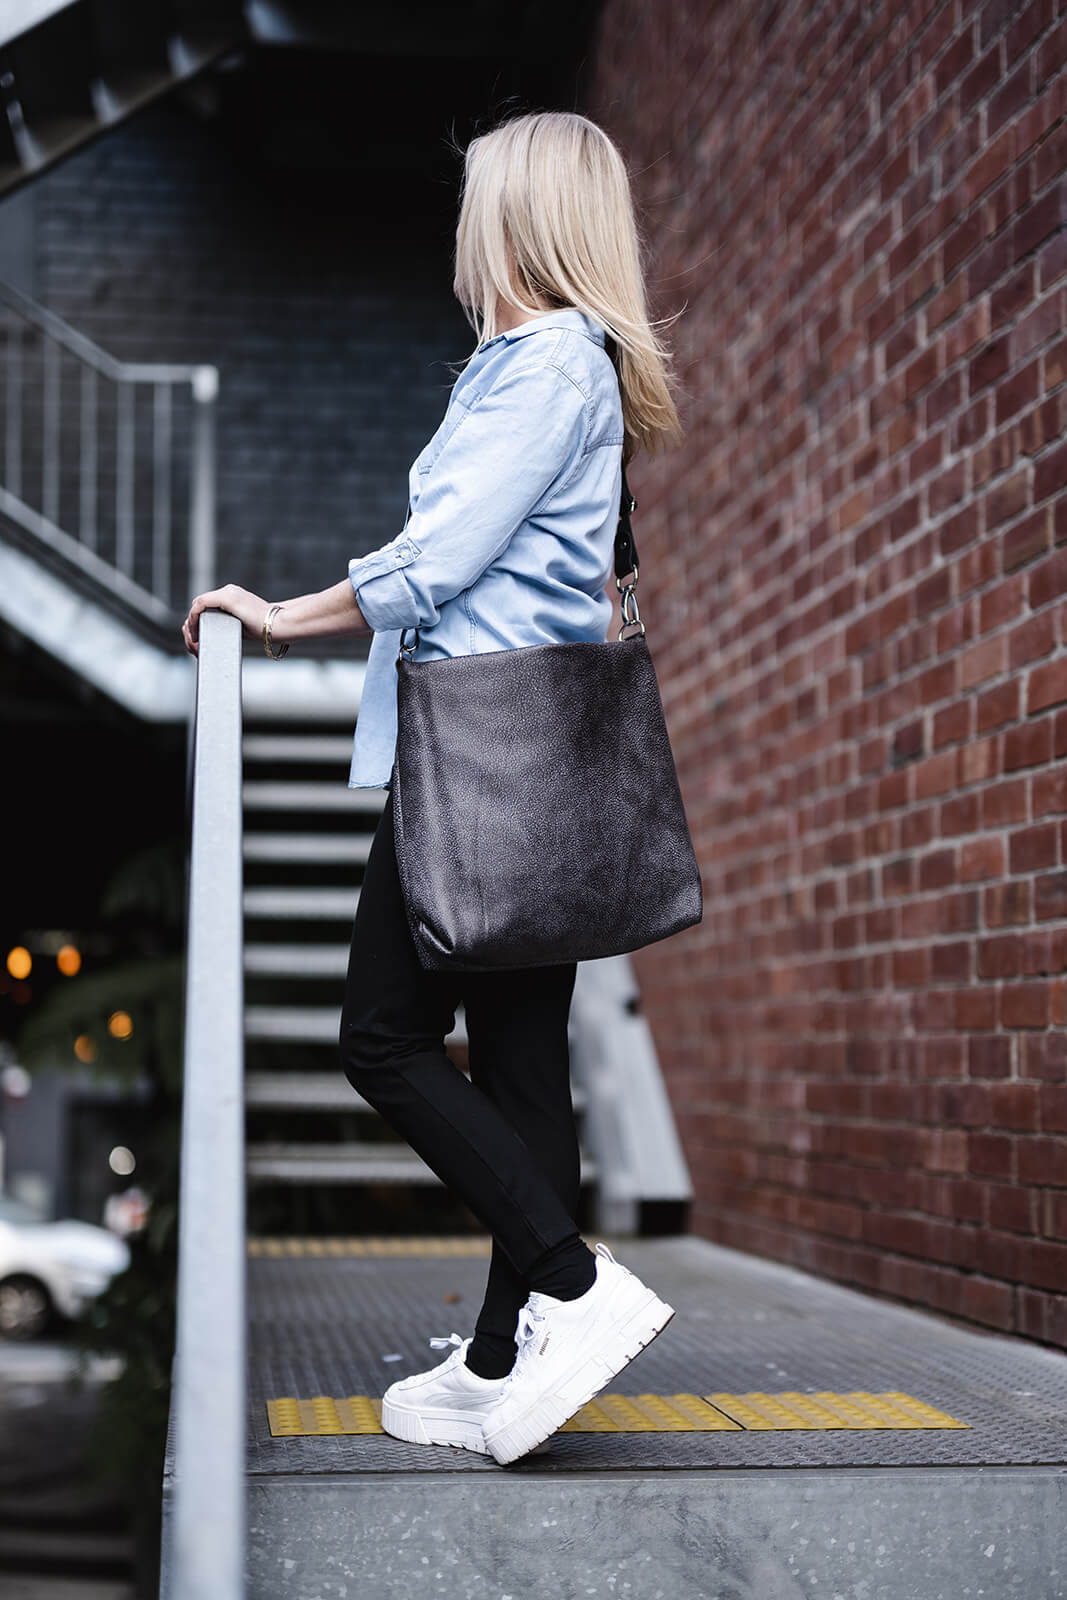 Lady standing on external stairs holding onto rails with profile view. Blonde hair, denim shirt, black jeans, white shoes and holding onto rail. Lady is modelling grey crossbody bag with black strap. The bag is the Ella Jackson Two-tone Grey Leather Carryall